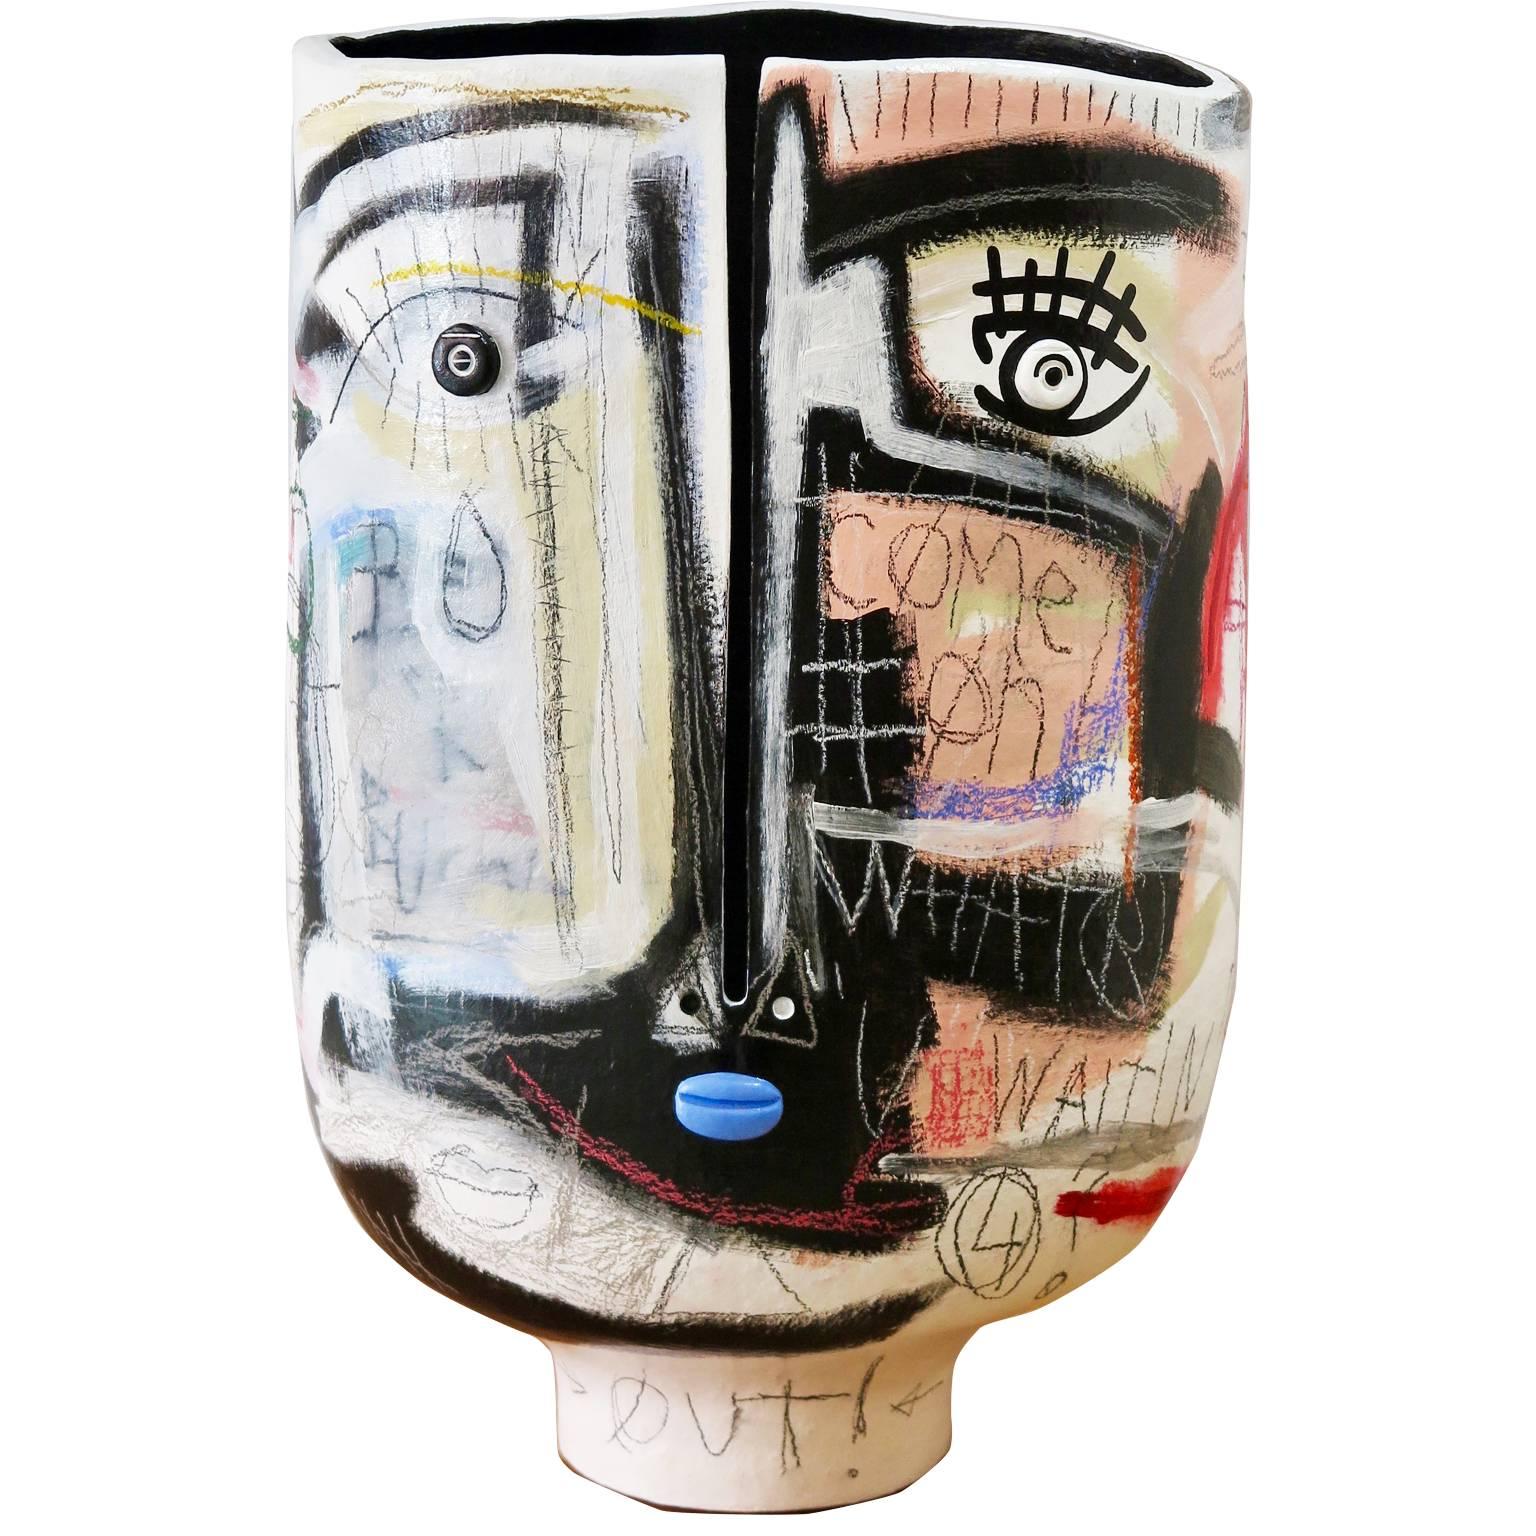 Unique matched huge painted ceramic vases / sculptures by atelier Dalo (ceramic and Gregoire Devin (paintings) France, 2017. The paintings are acrylics, oil on ceramics and are inspired by Warhol, Picasso, Basquiat, Streetart and French ceramics